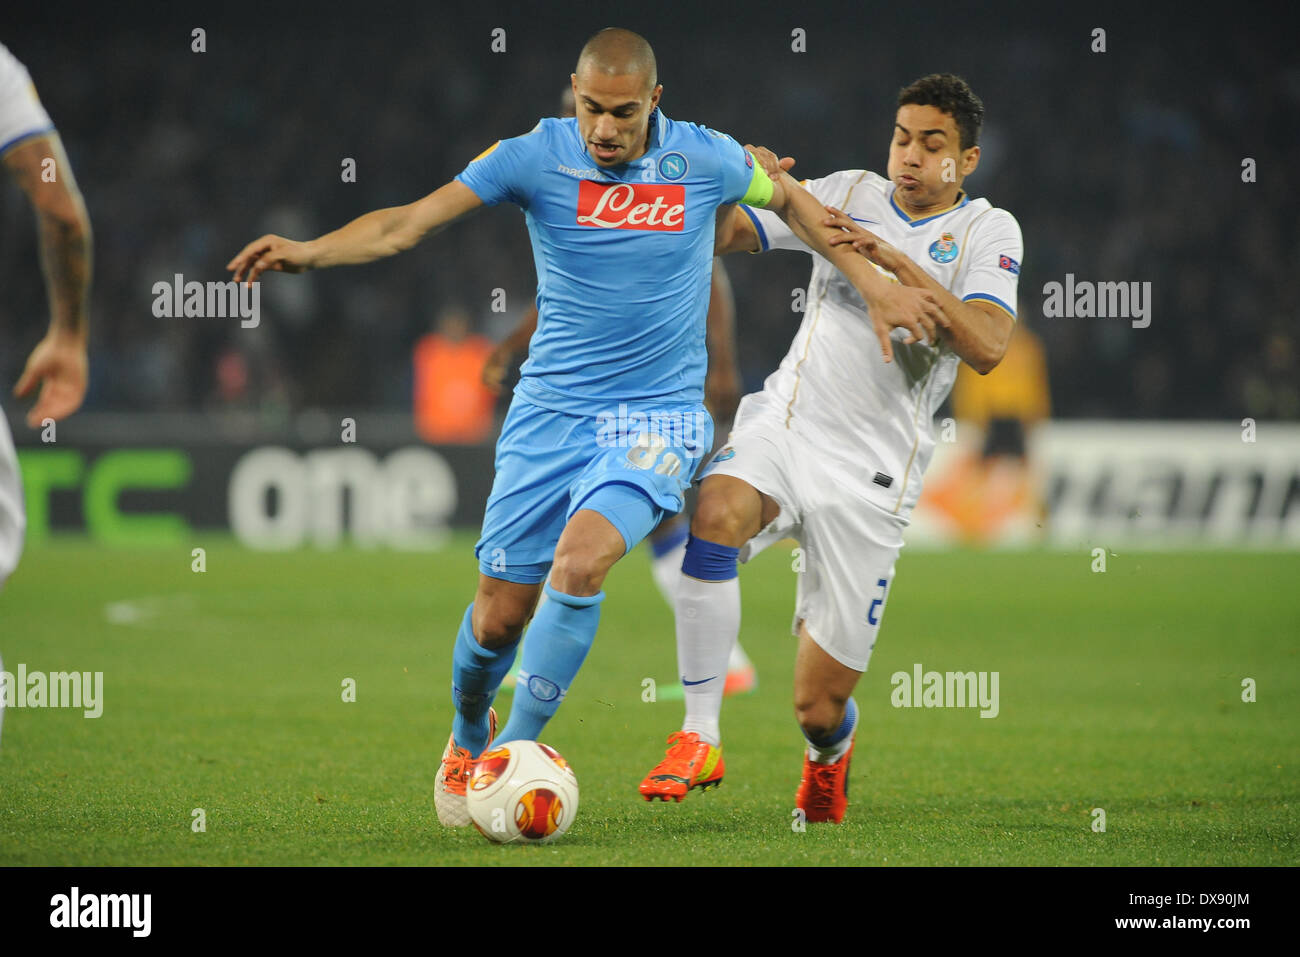 Naples, ITALY. 20th Mar, 2014. Gokhan Inler during the UEFA Europa League Round of 16 Second Leg match between SSC Napoli and FC Porto Football/Soccer at Stadio San Paolo on March 20, 2014 in Naples, Italy. Credit:  Franco Romano/NurPhoto/ZUMAPRESS.com/Alamy Live News Stock Photo